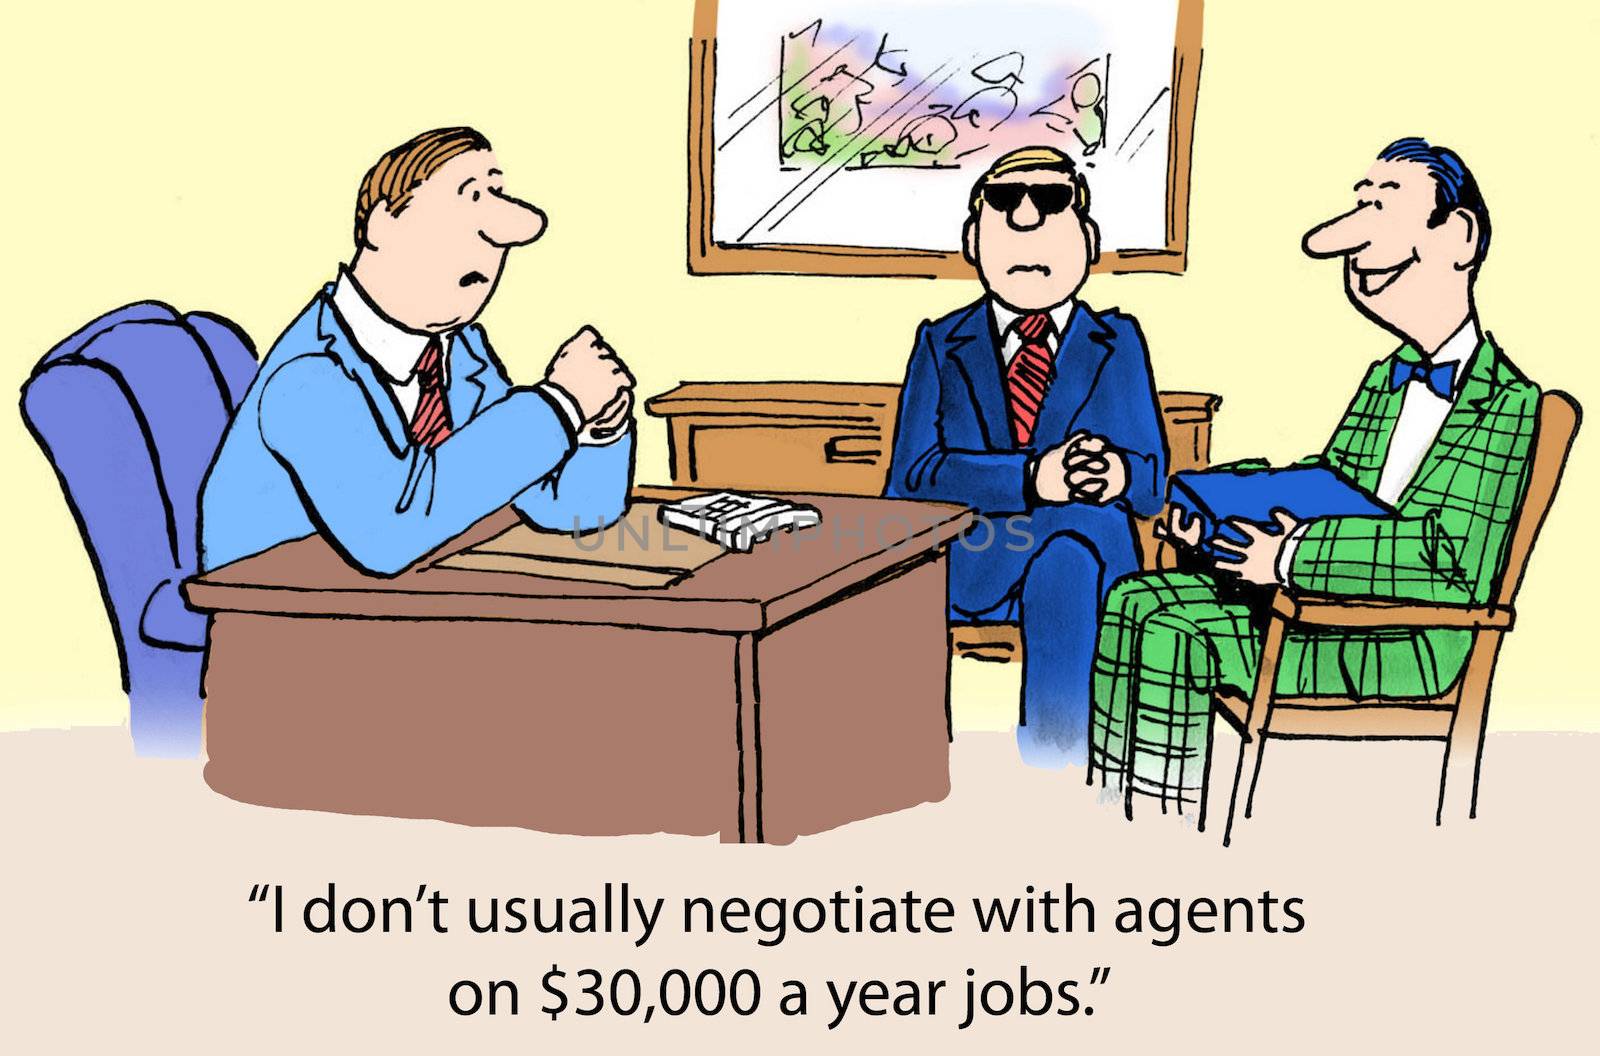 "I don't usually negotiate with agents on $30,000 a year jobs."